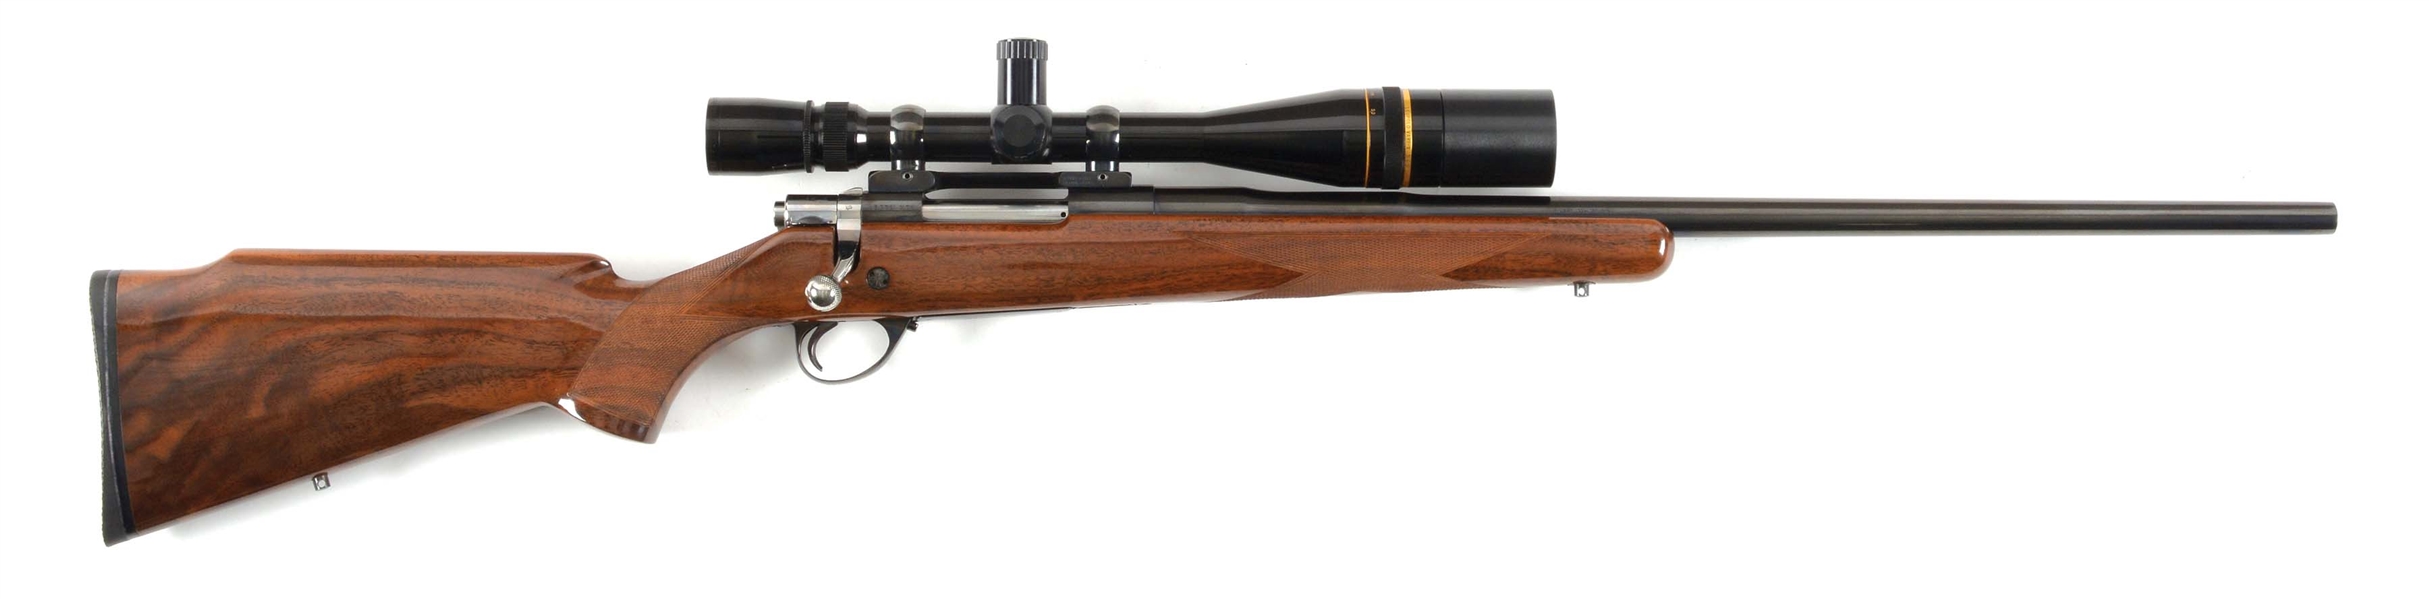 (M) BROWNING SAFARI .22-250 BOLT ACTION RIFLE WITH SCOPE.